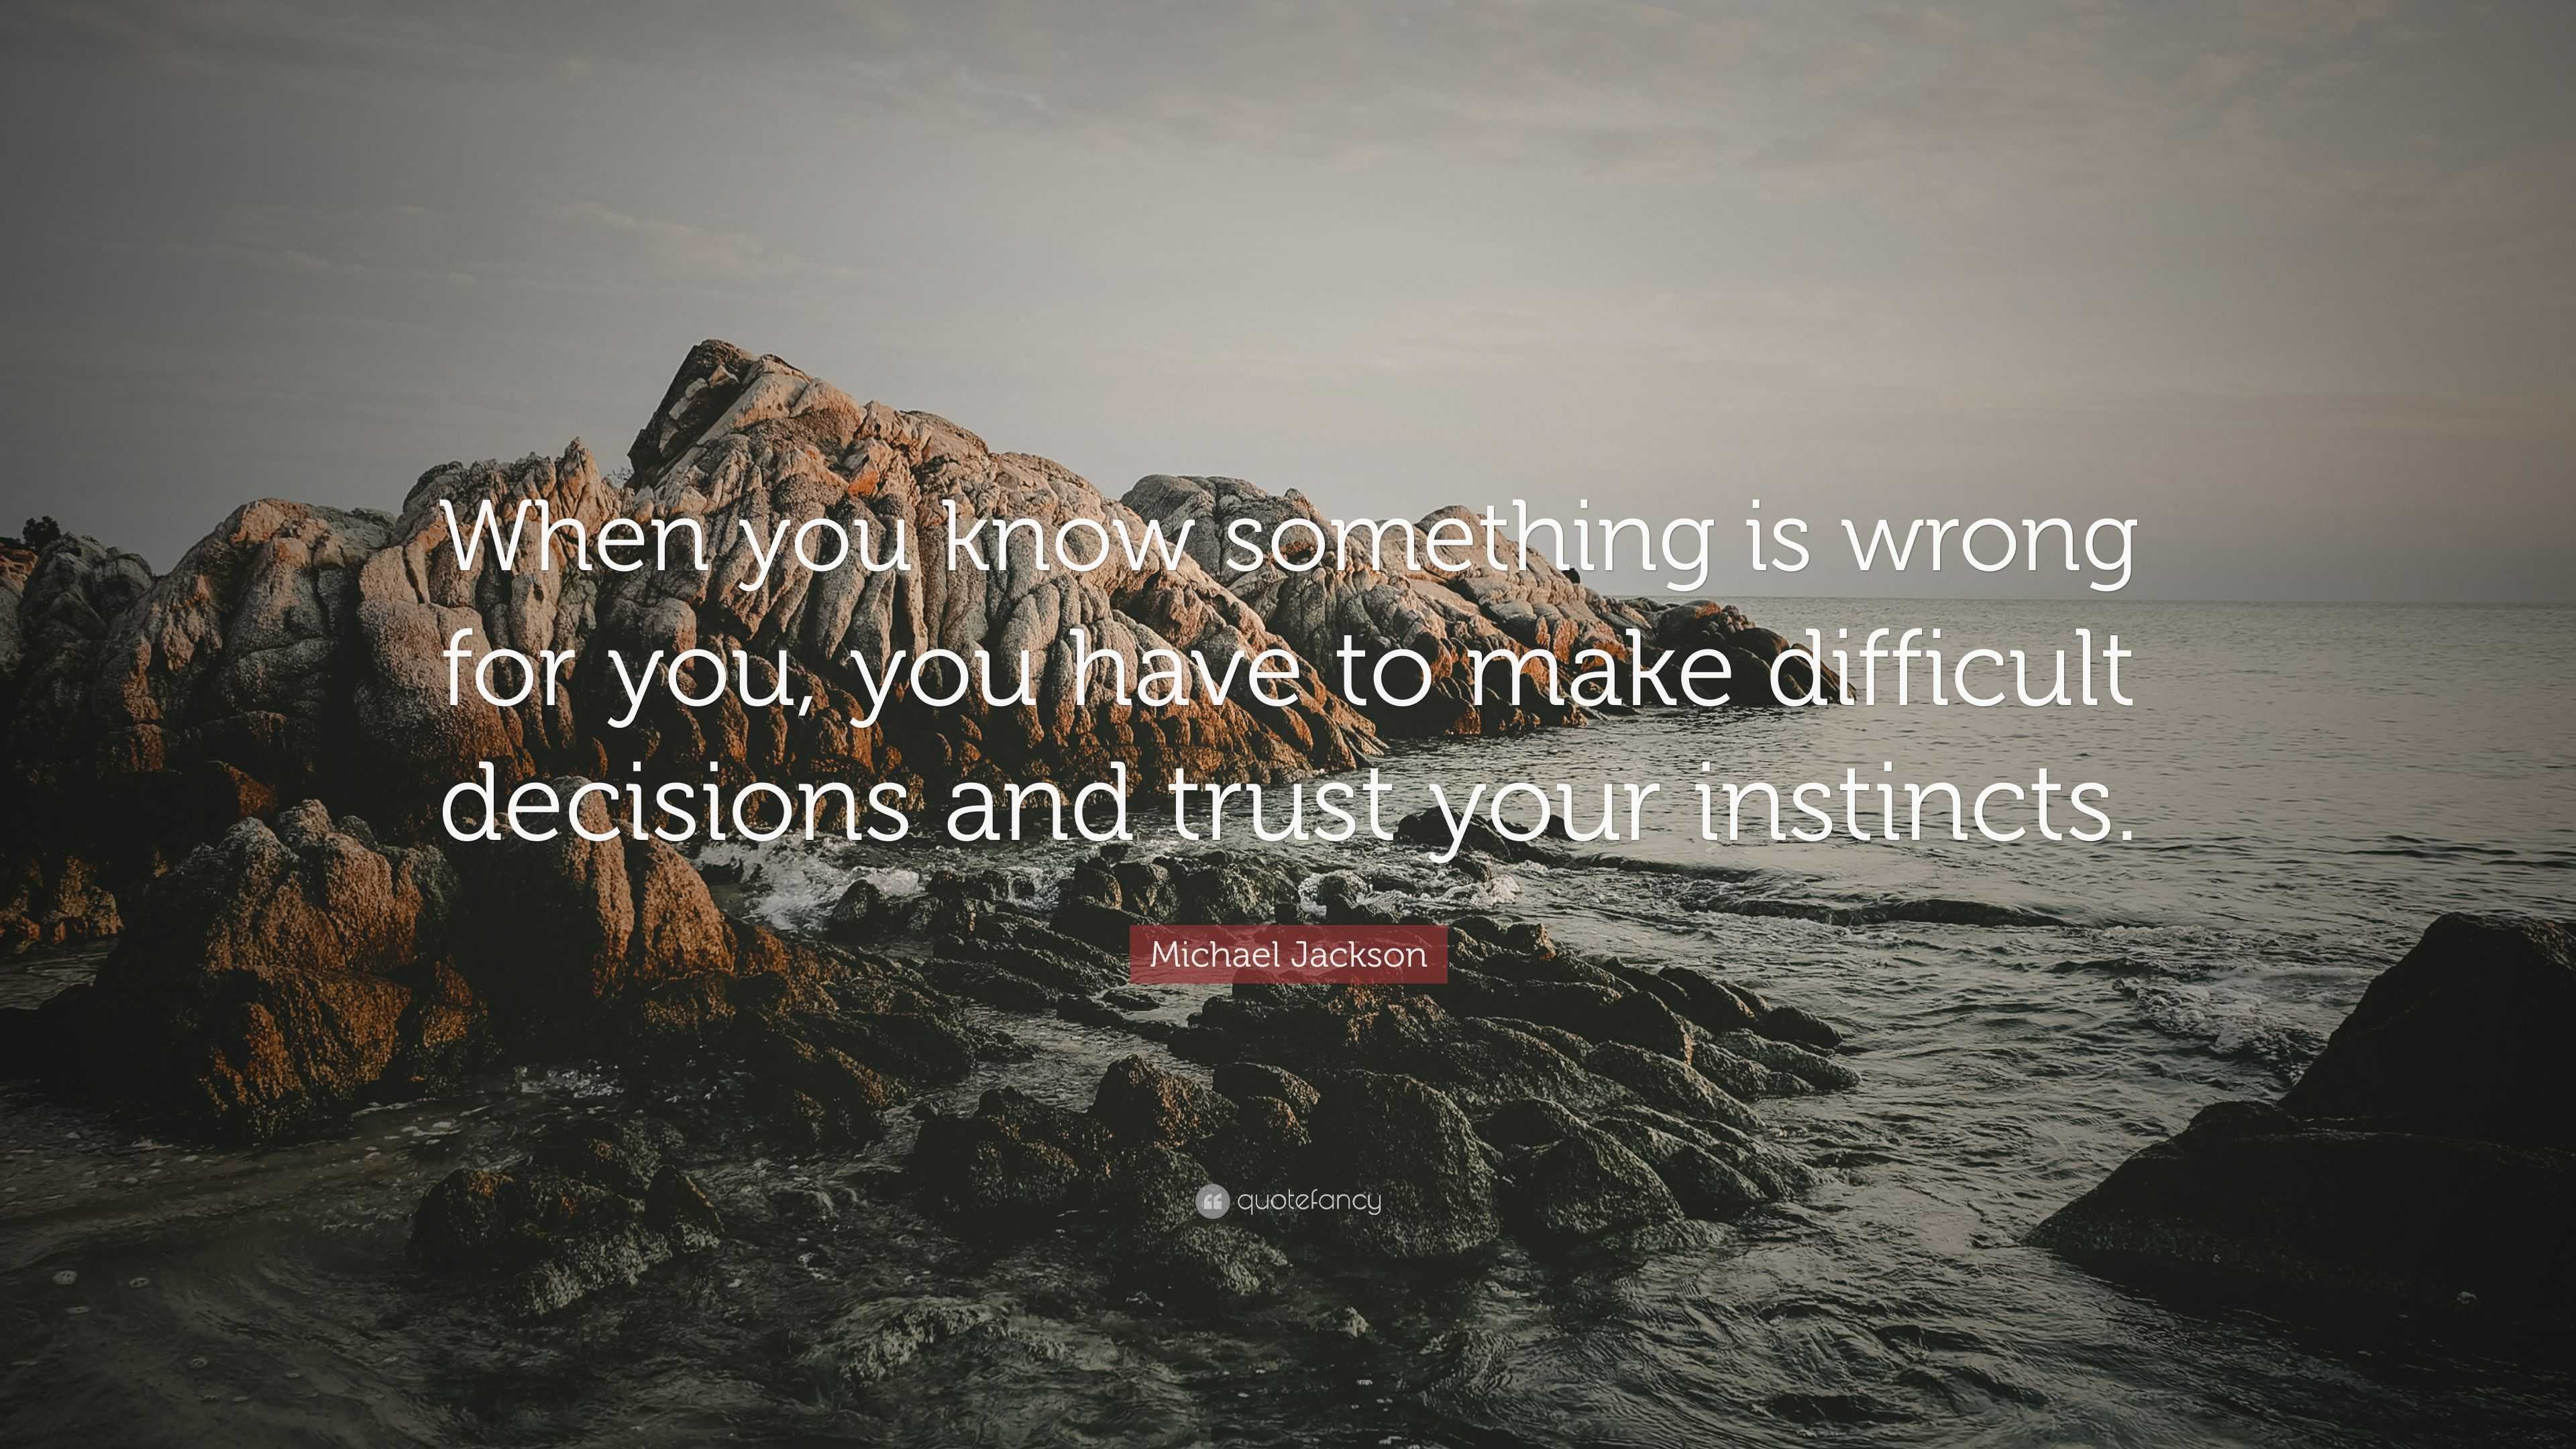 Michael Jackson Quote: “When you know something is wrong for you, you ...